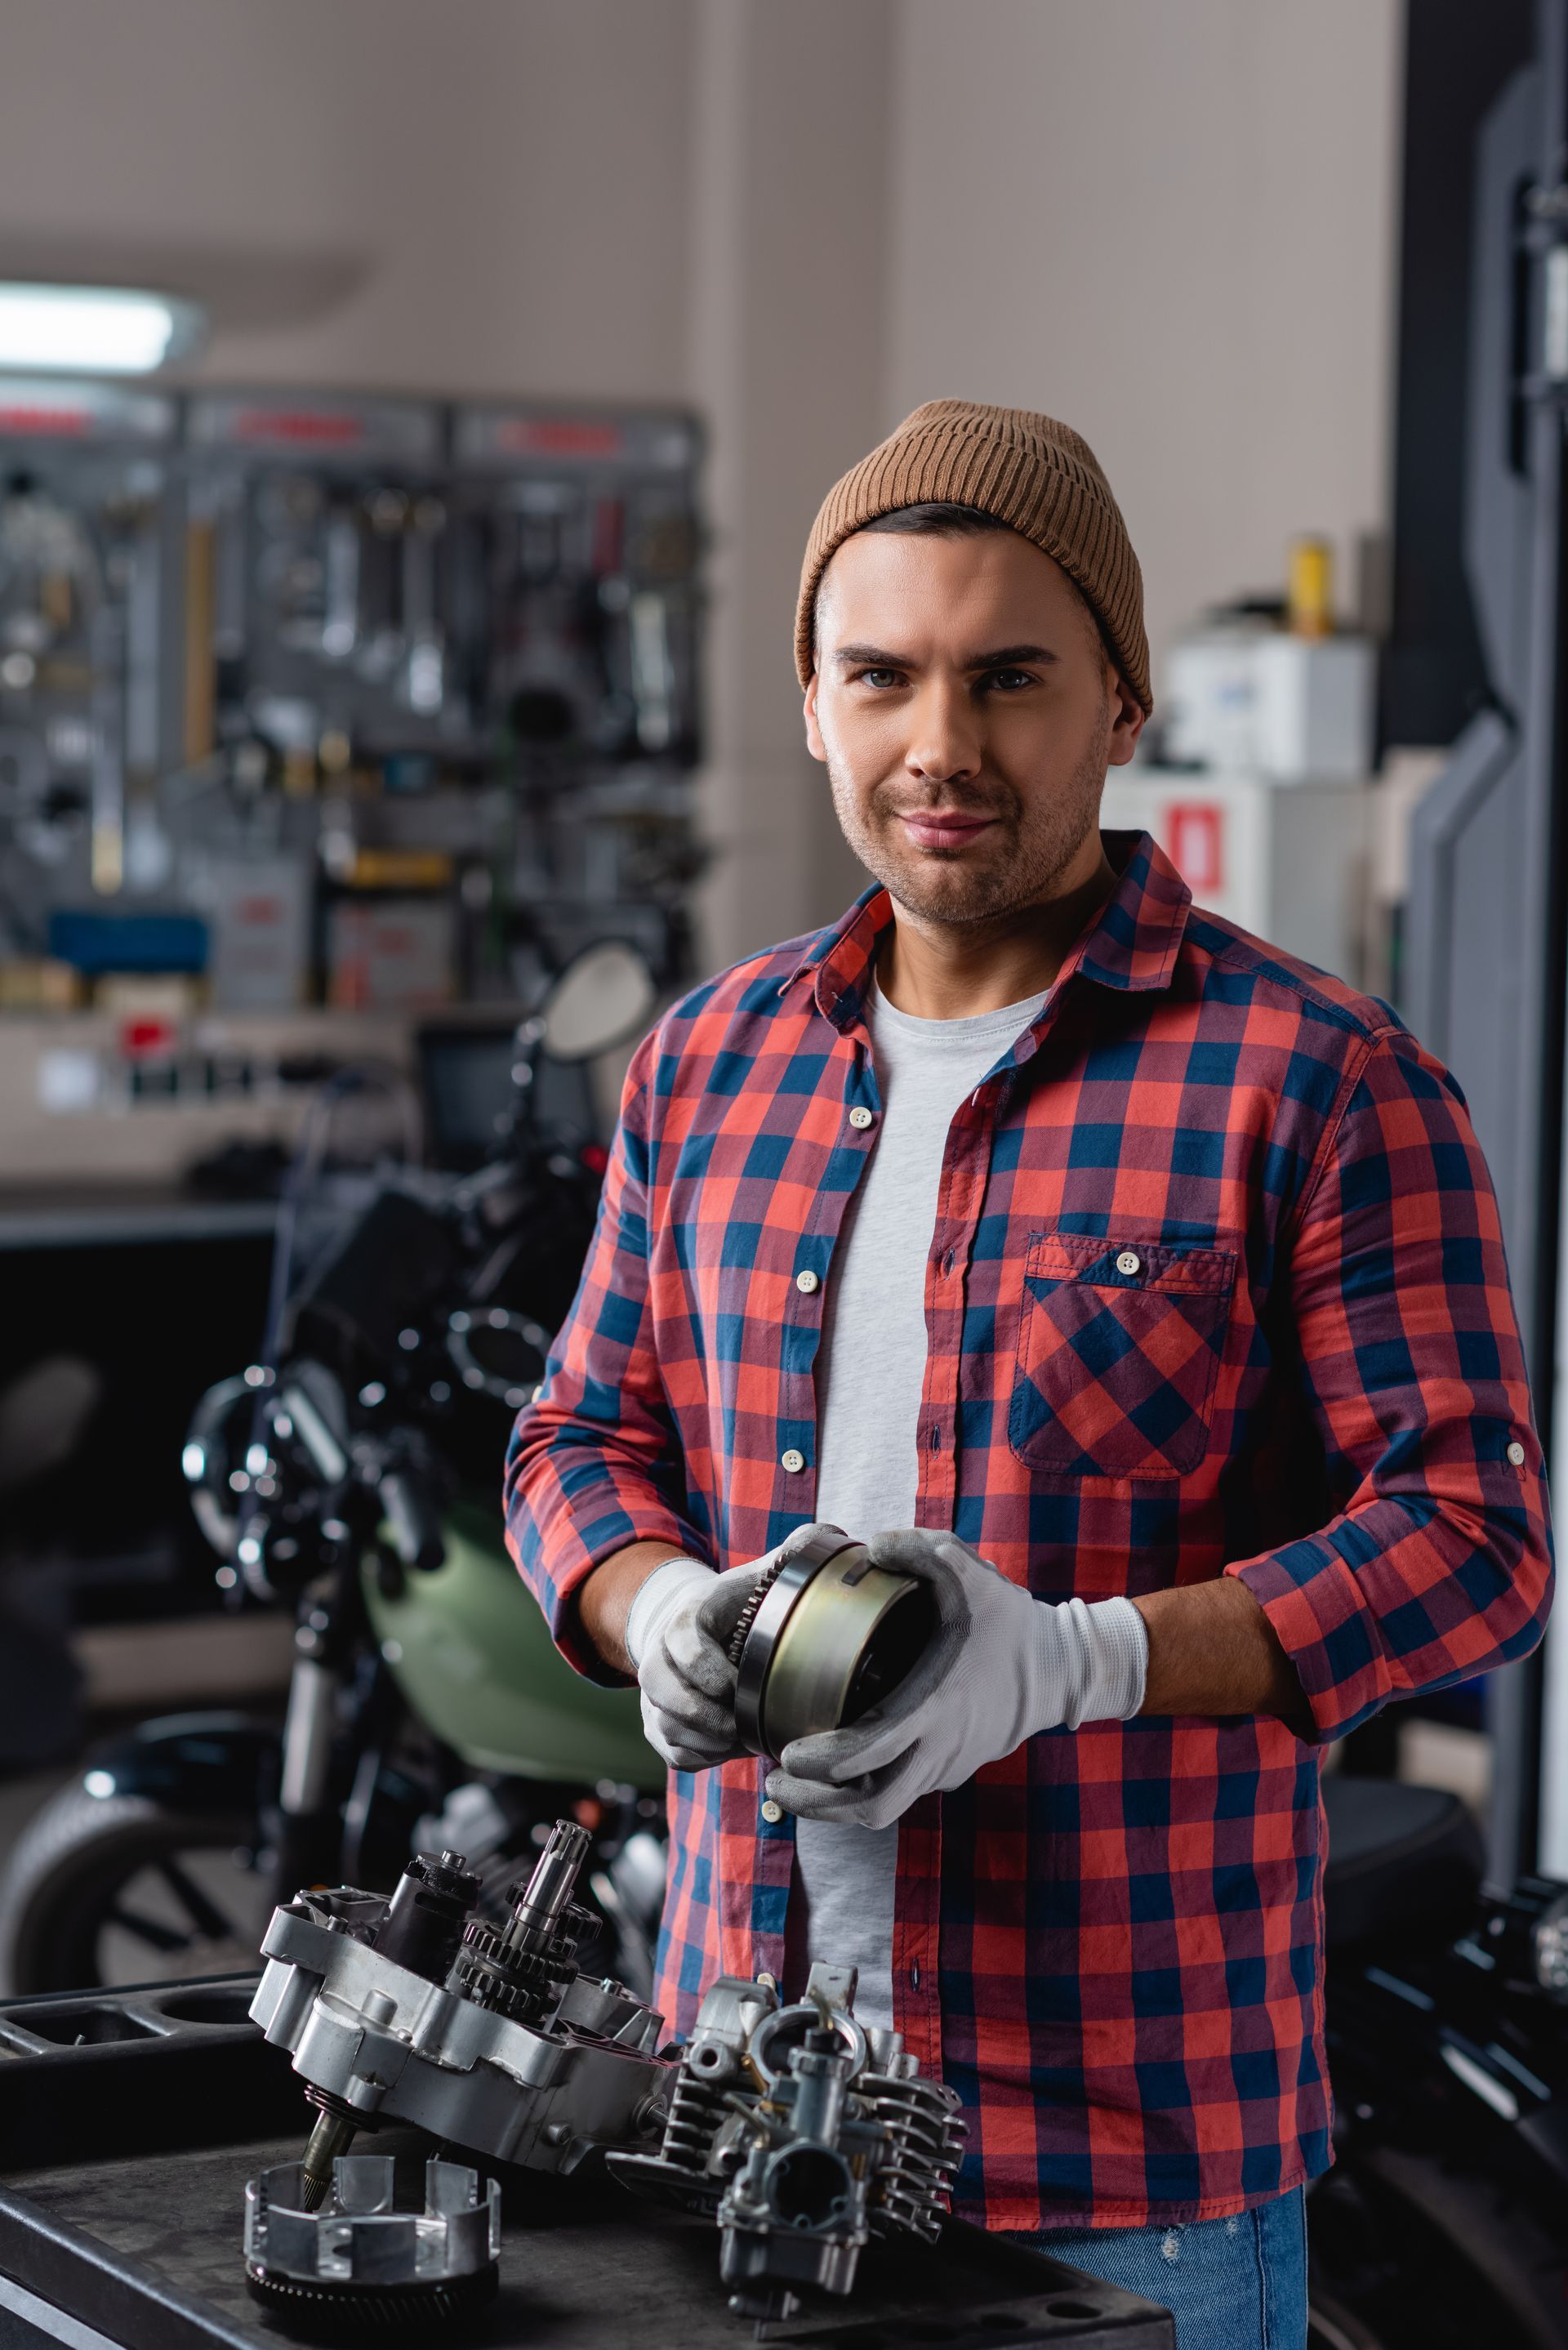 A man in a plaid shirt is working on a motorcycle in a garage.